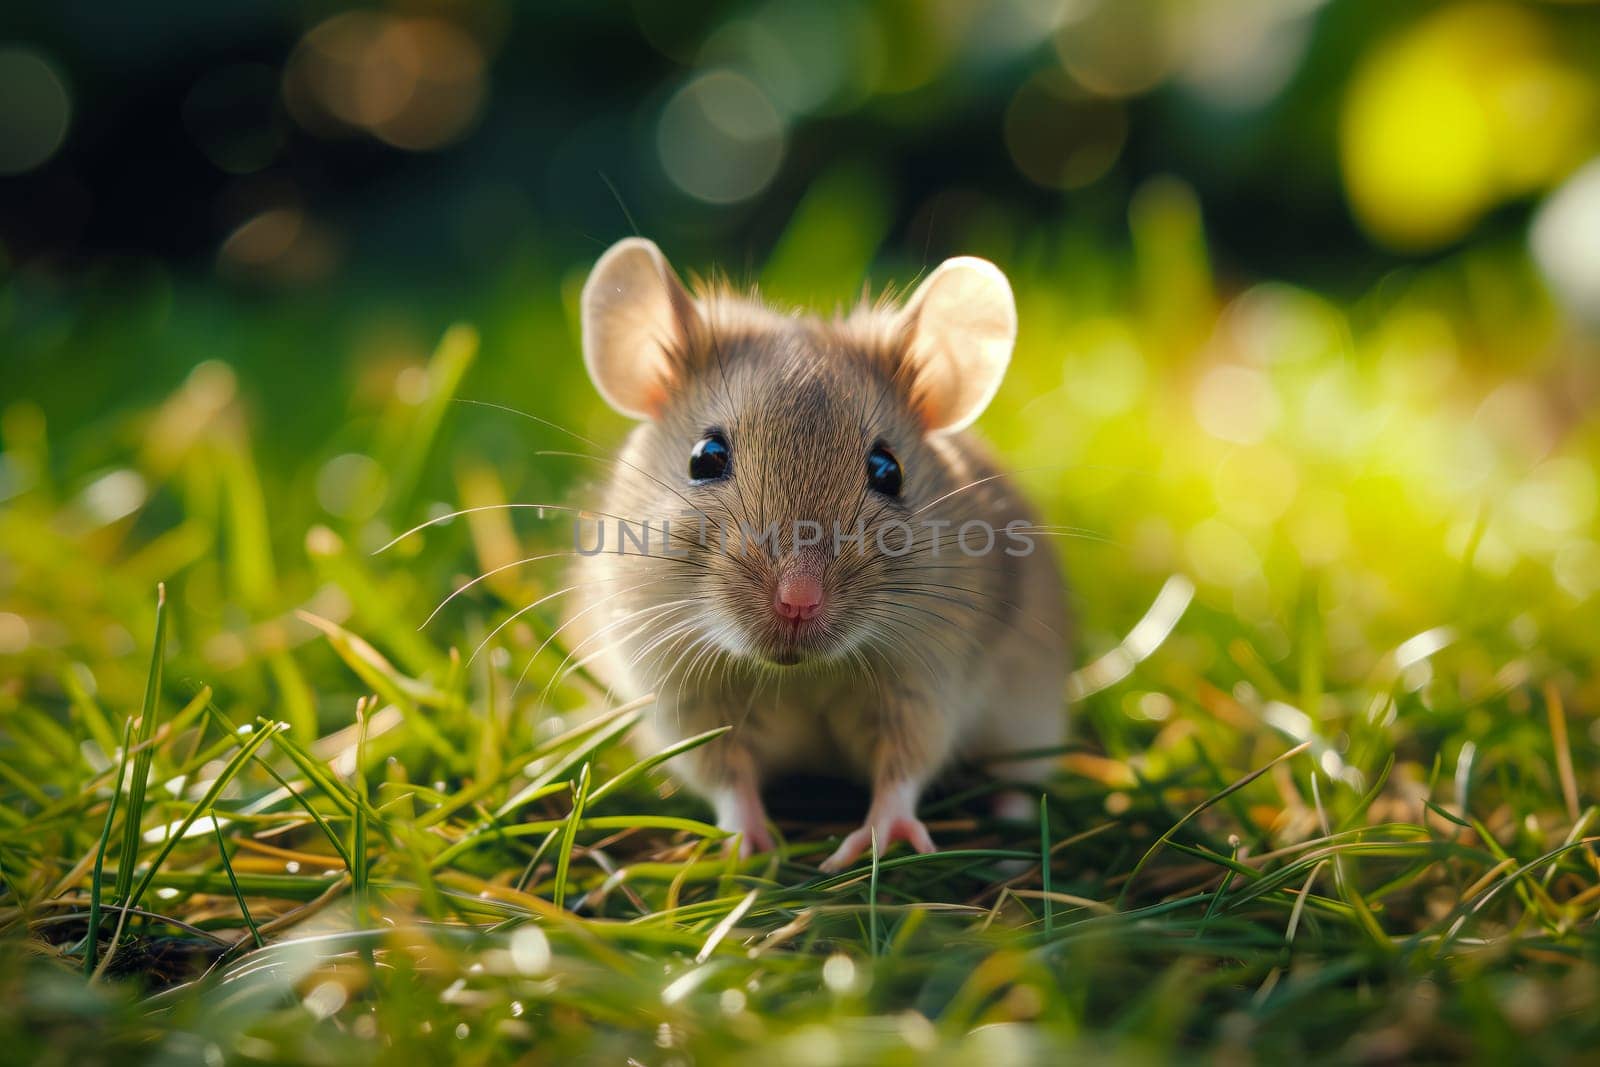 Mouse in Lush Green Grass by dimol